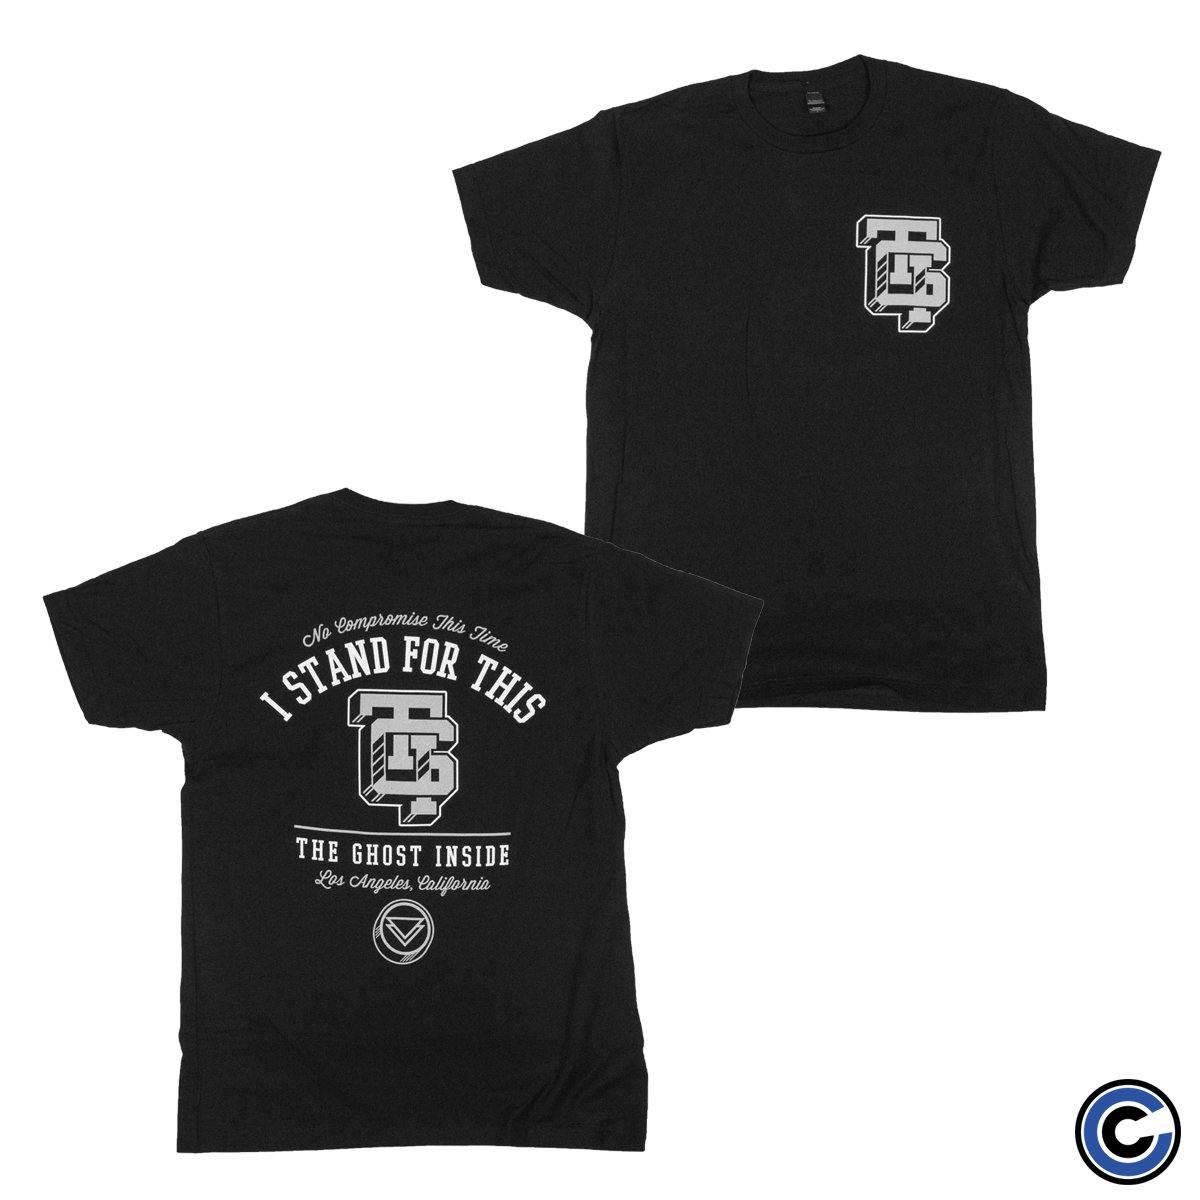 Buy – The Ghost Inside "Stand Alone" Shirt – Band & Music Merch – Cold Cuts Merch